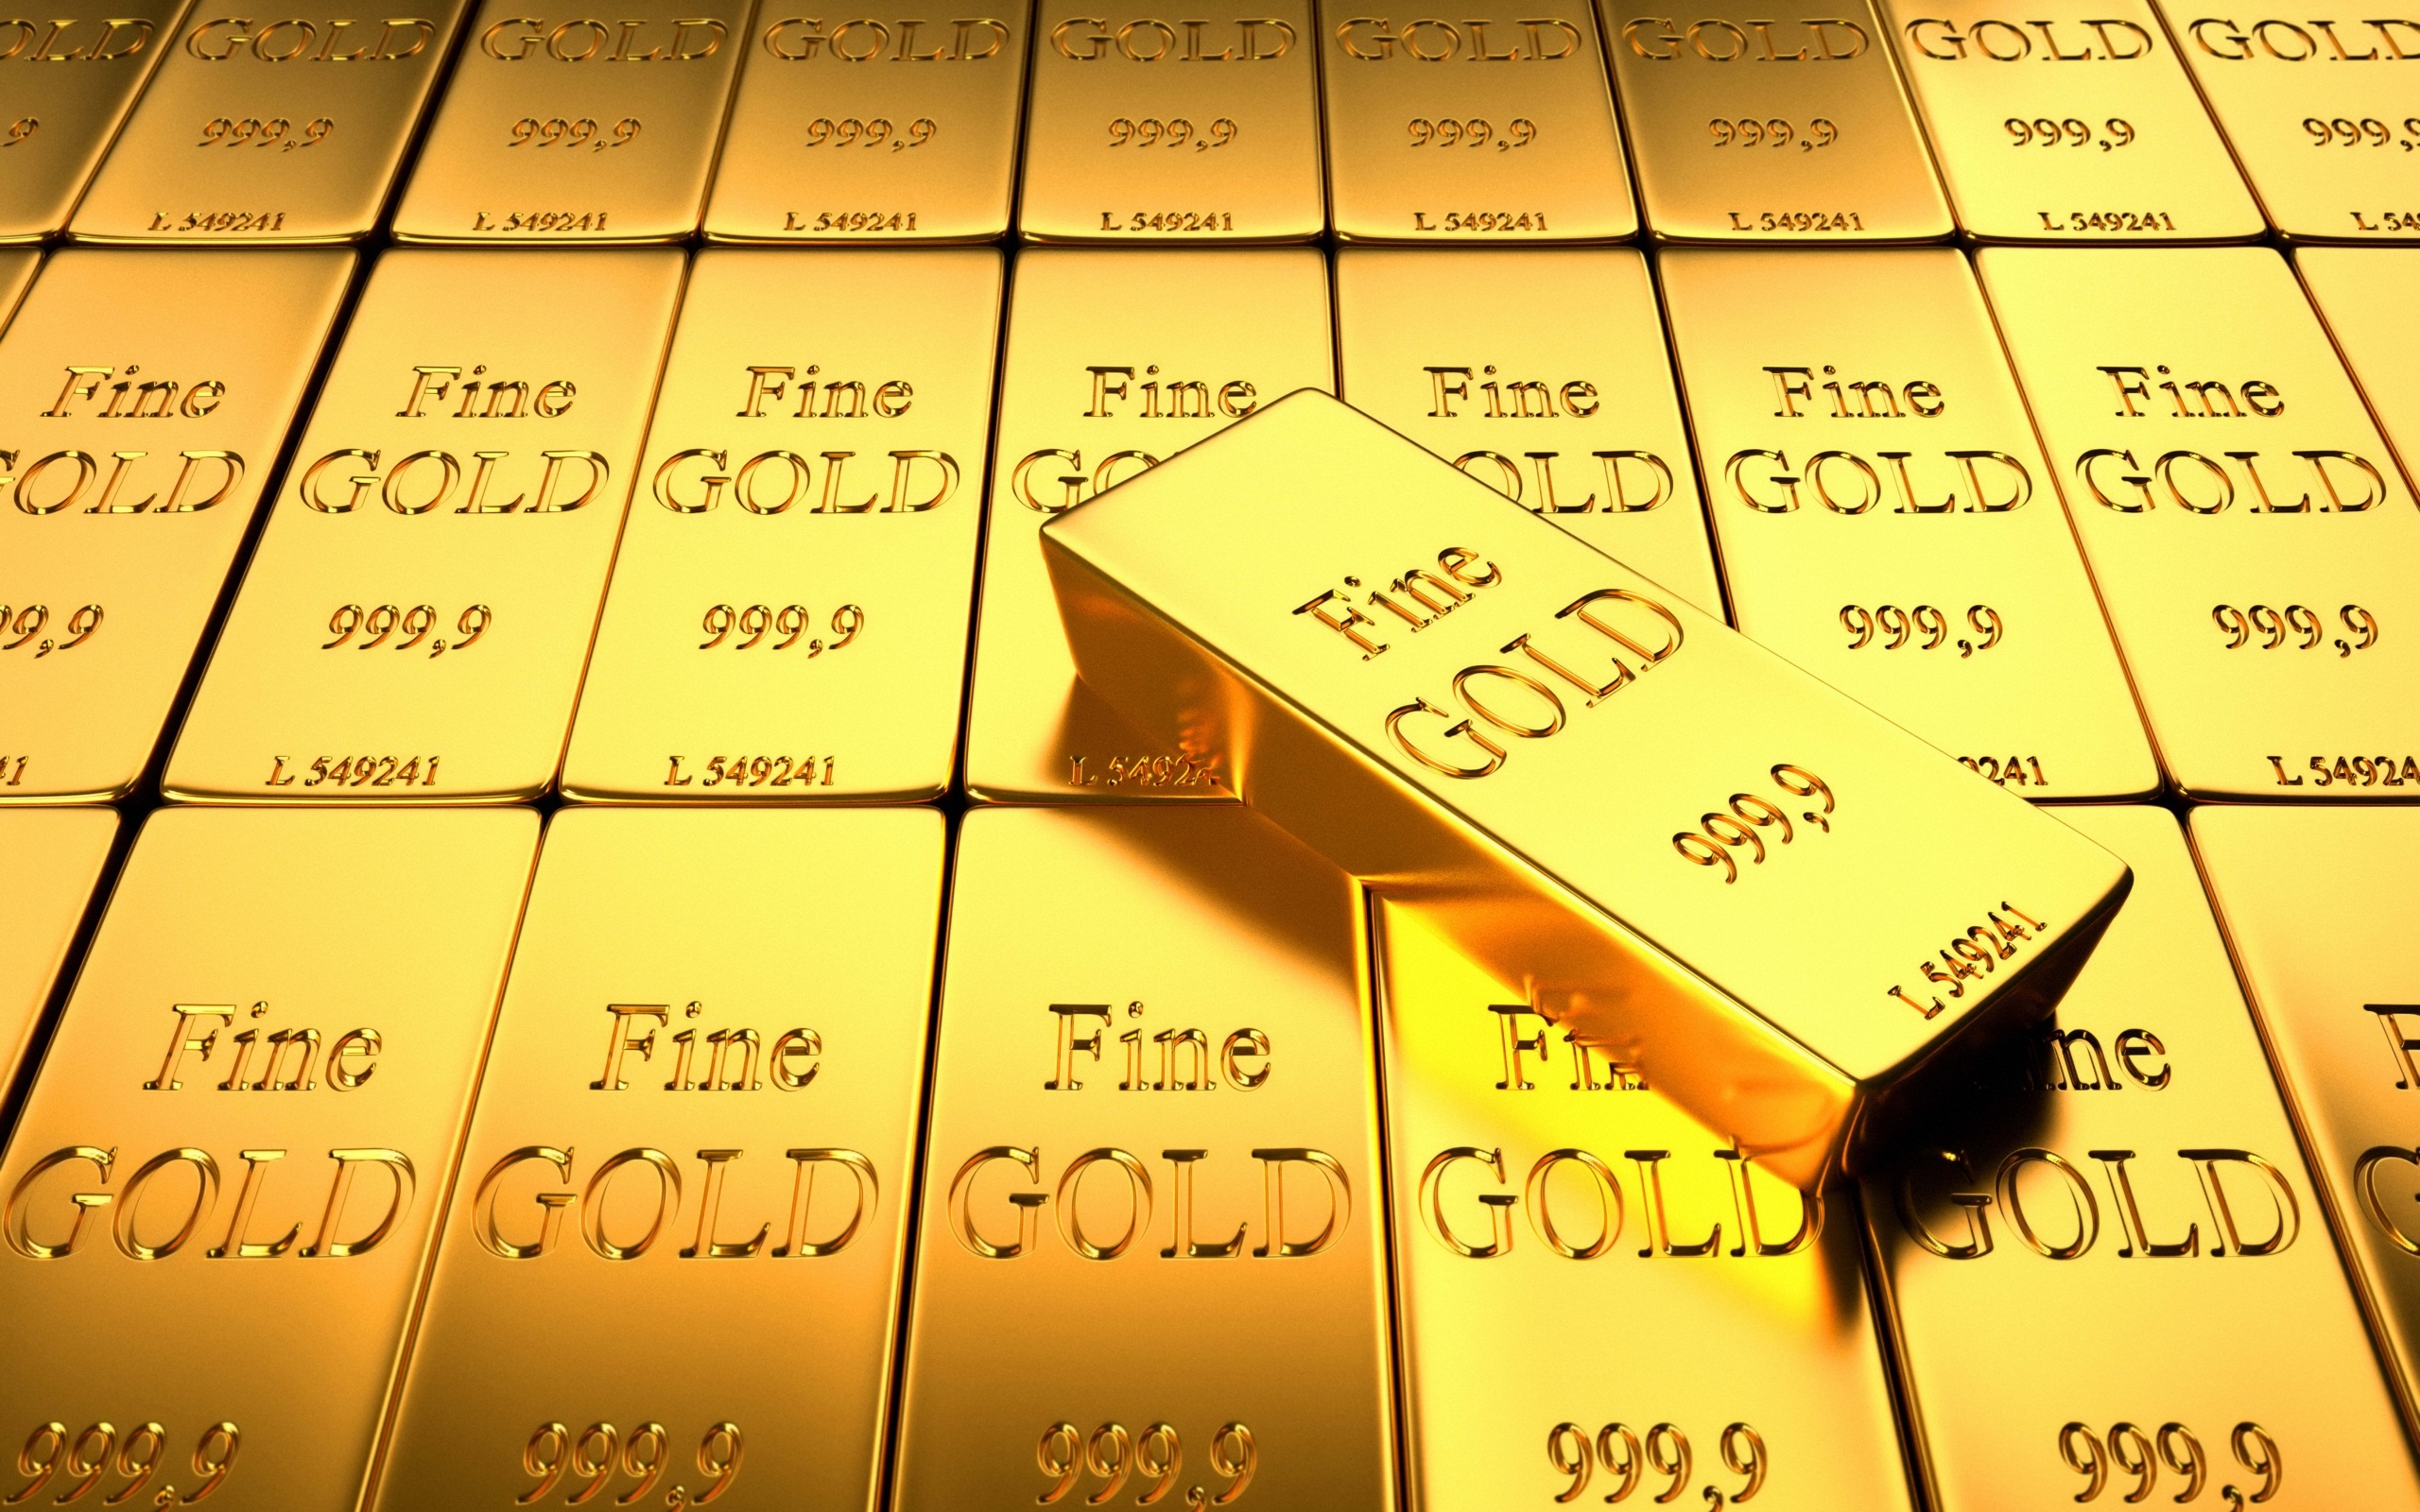     Ounces  Of Gold In 2012 And Extends Gold Production   Eastafro Com